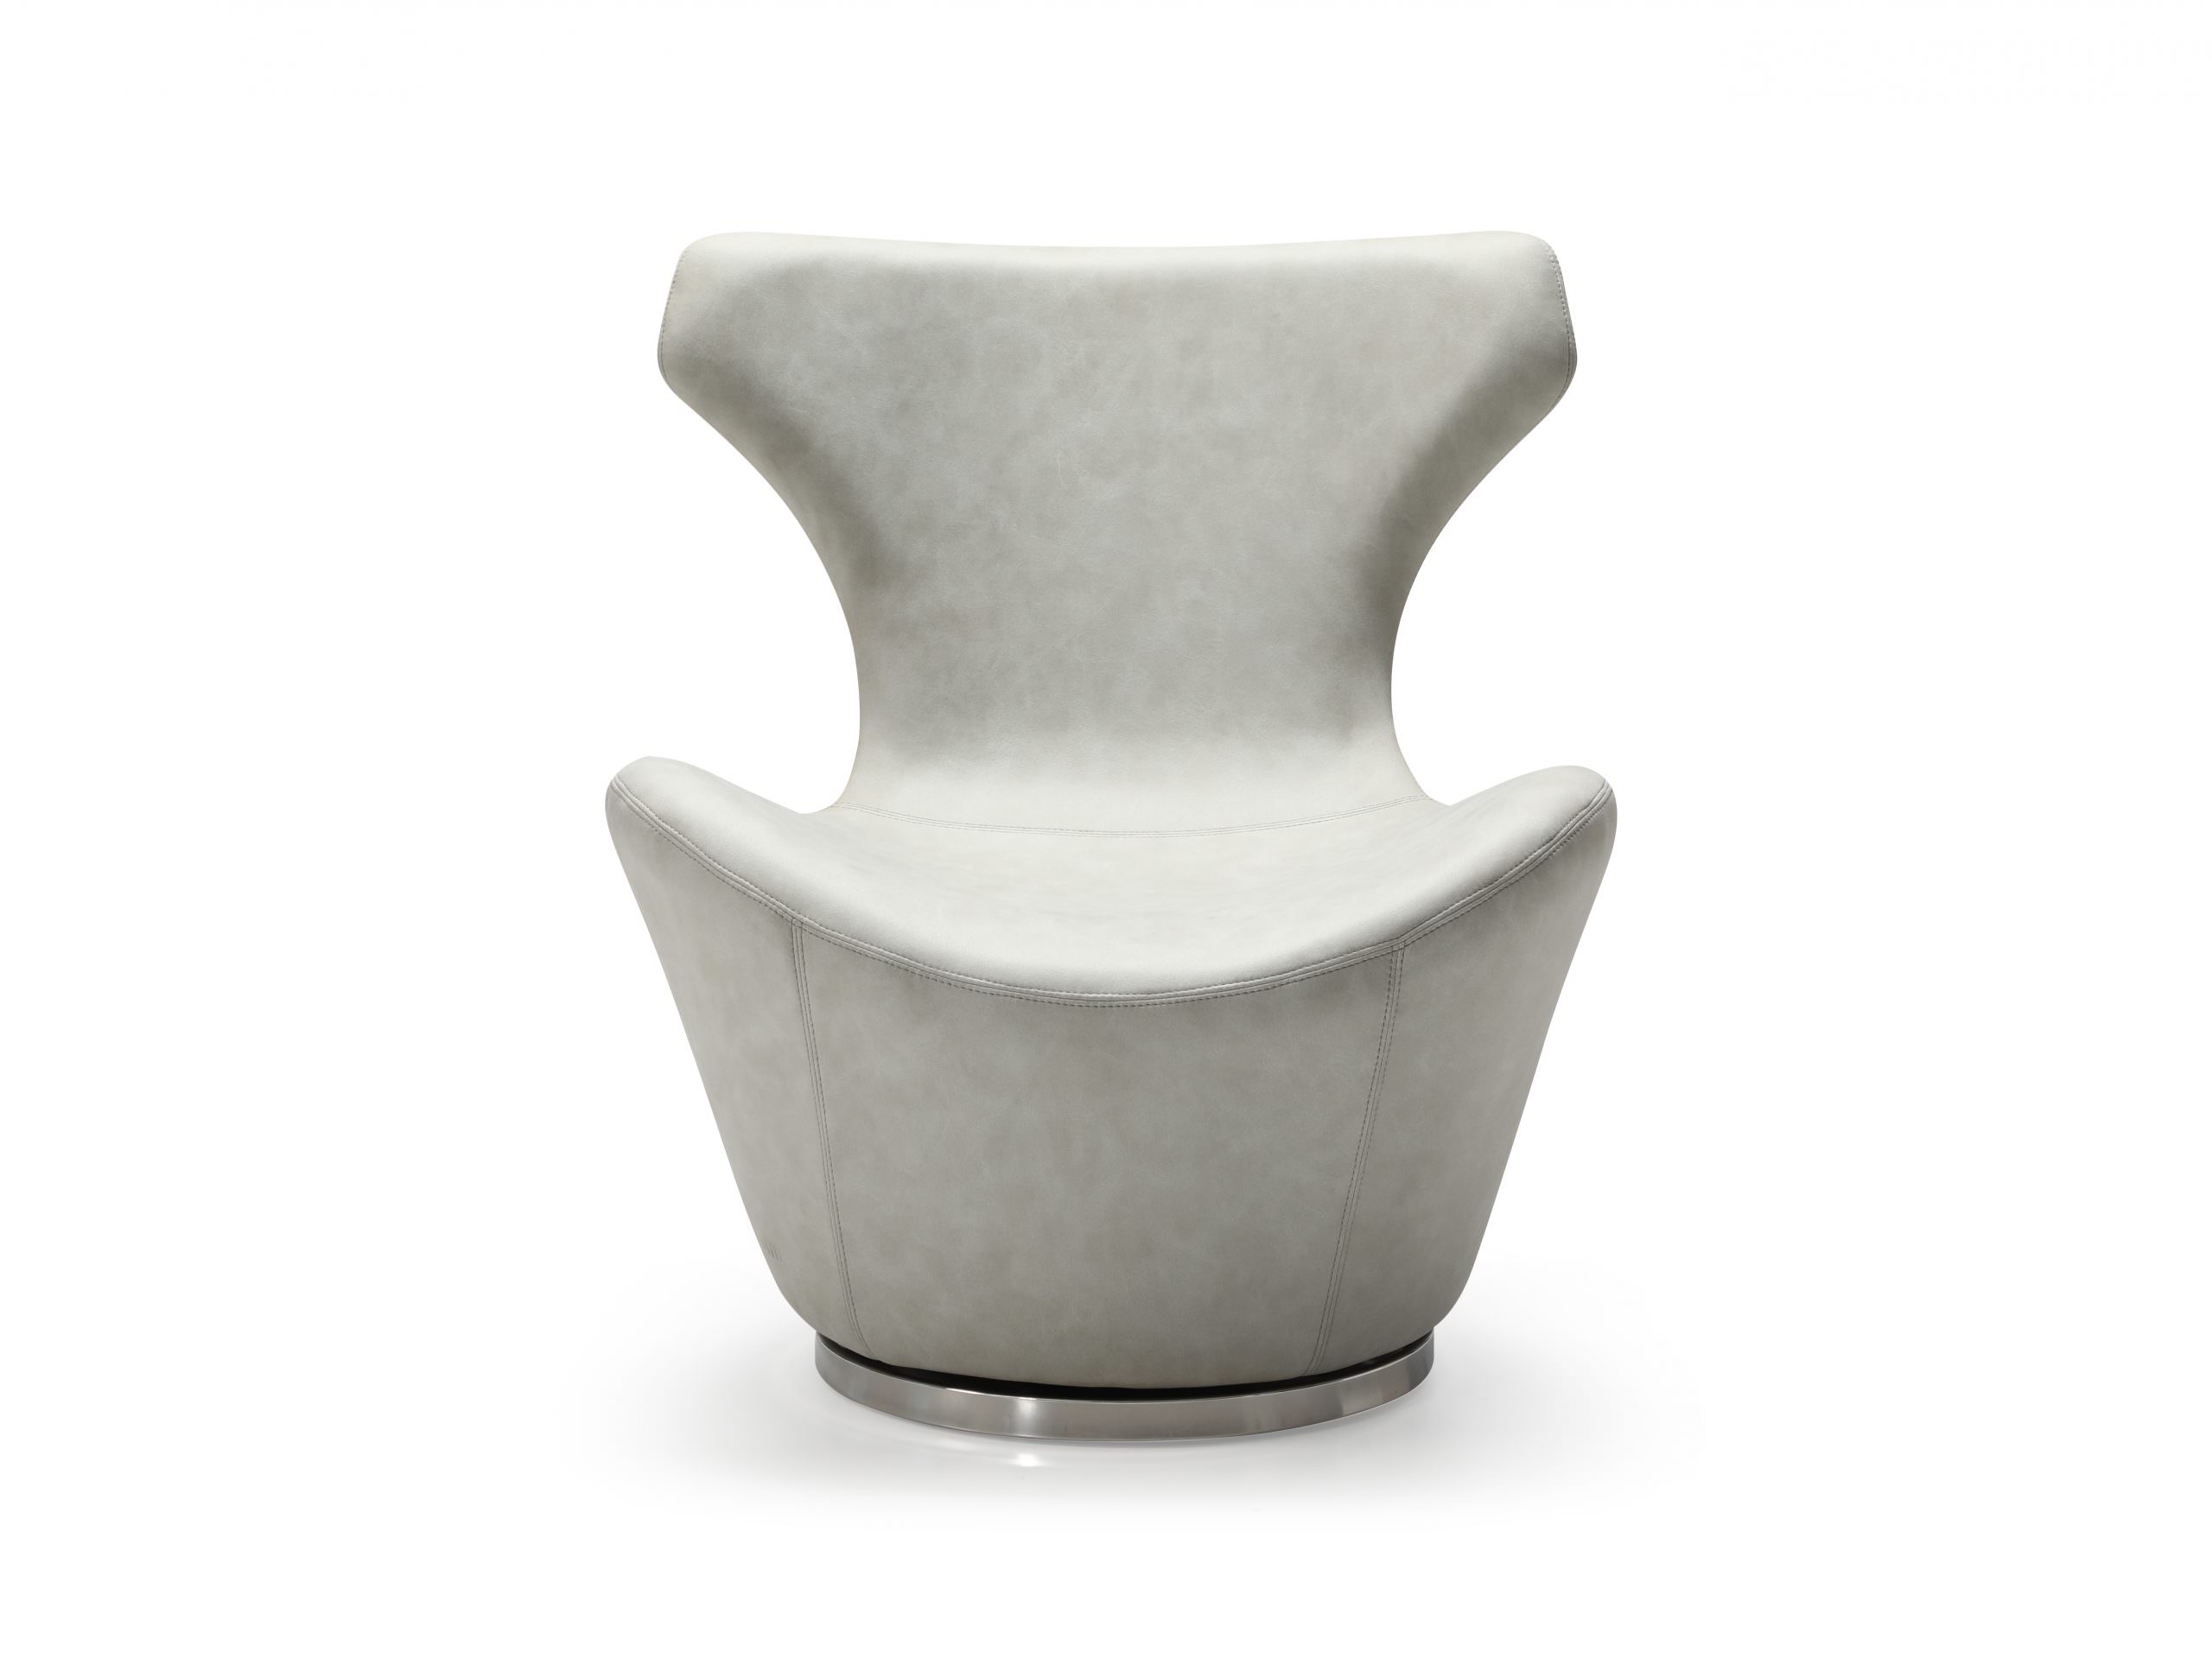 The Easton Swivel Leisure Chair is available in blue or light grey, waterproof fabric. It's complimented with a beautifully polished stainless steel base.